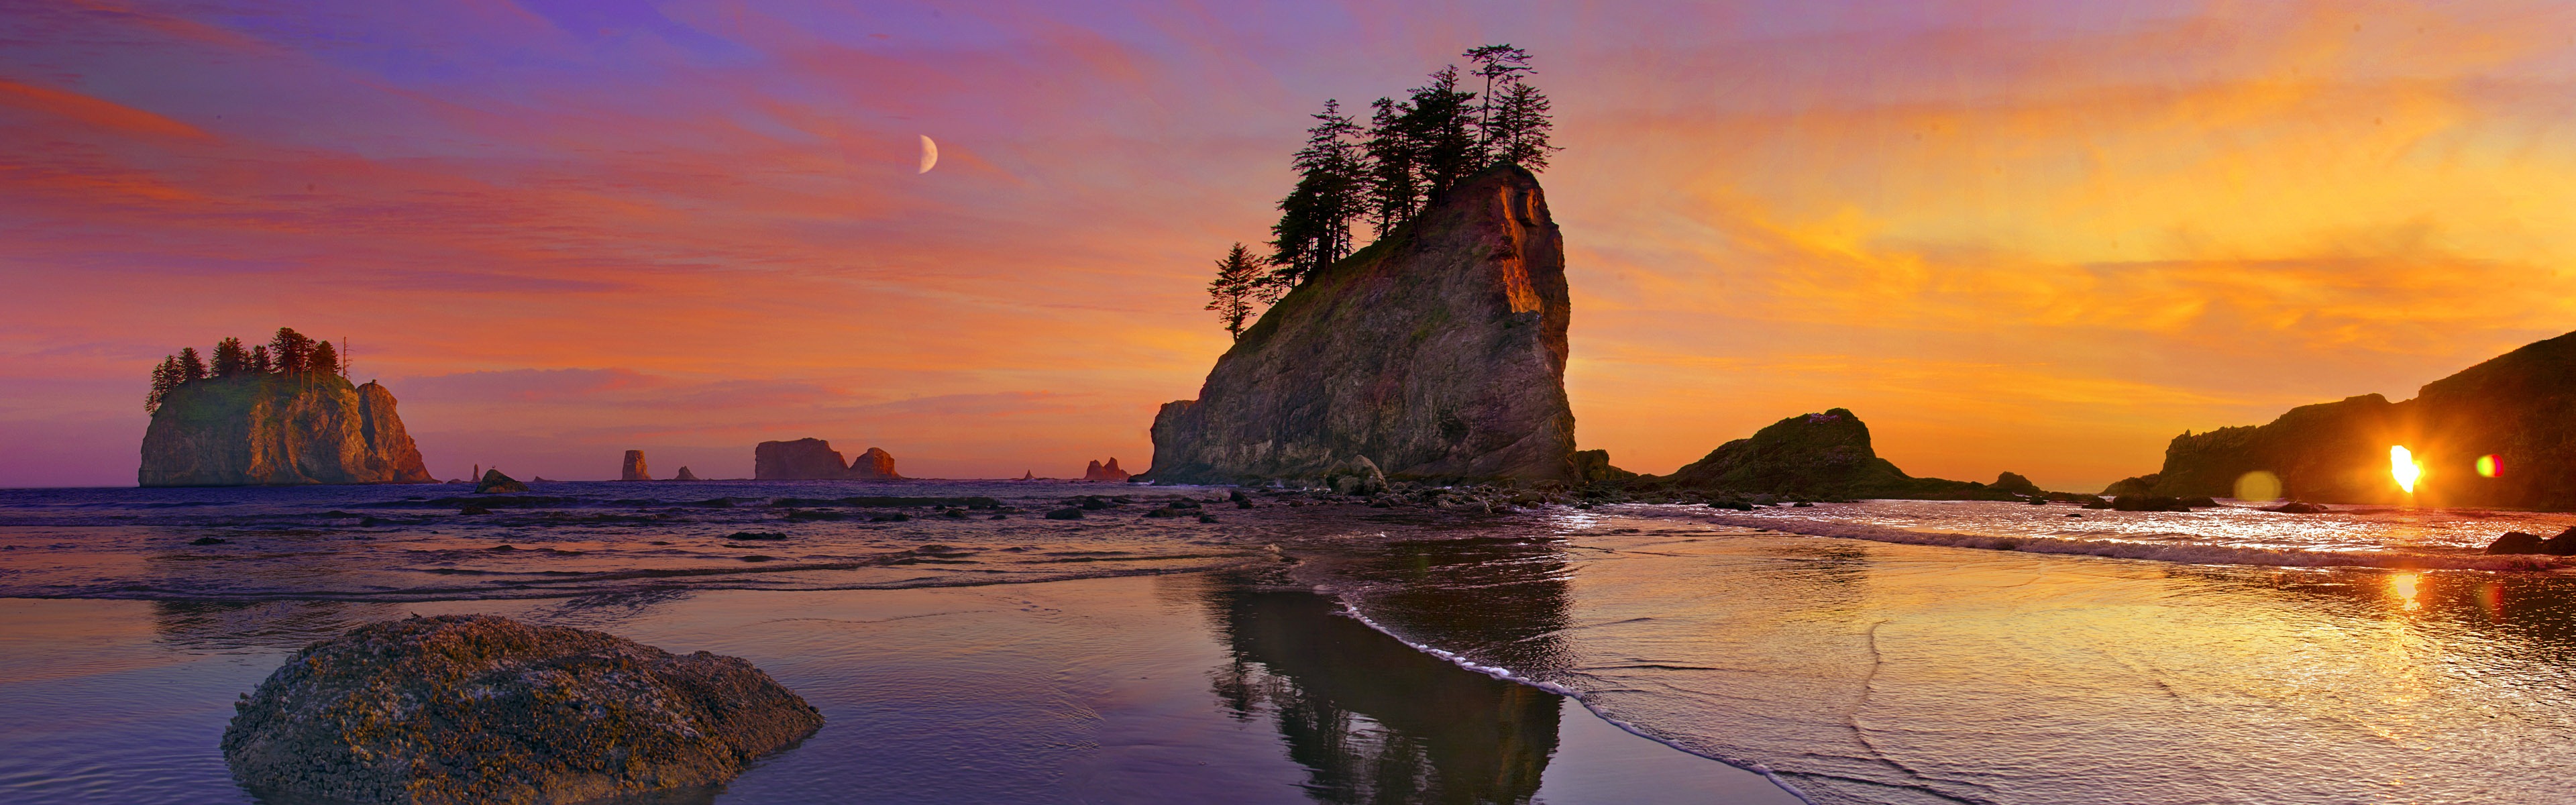 Windows 8 Official Panoramic Wallpaper, Cityscapes, National Park, Second Beach